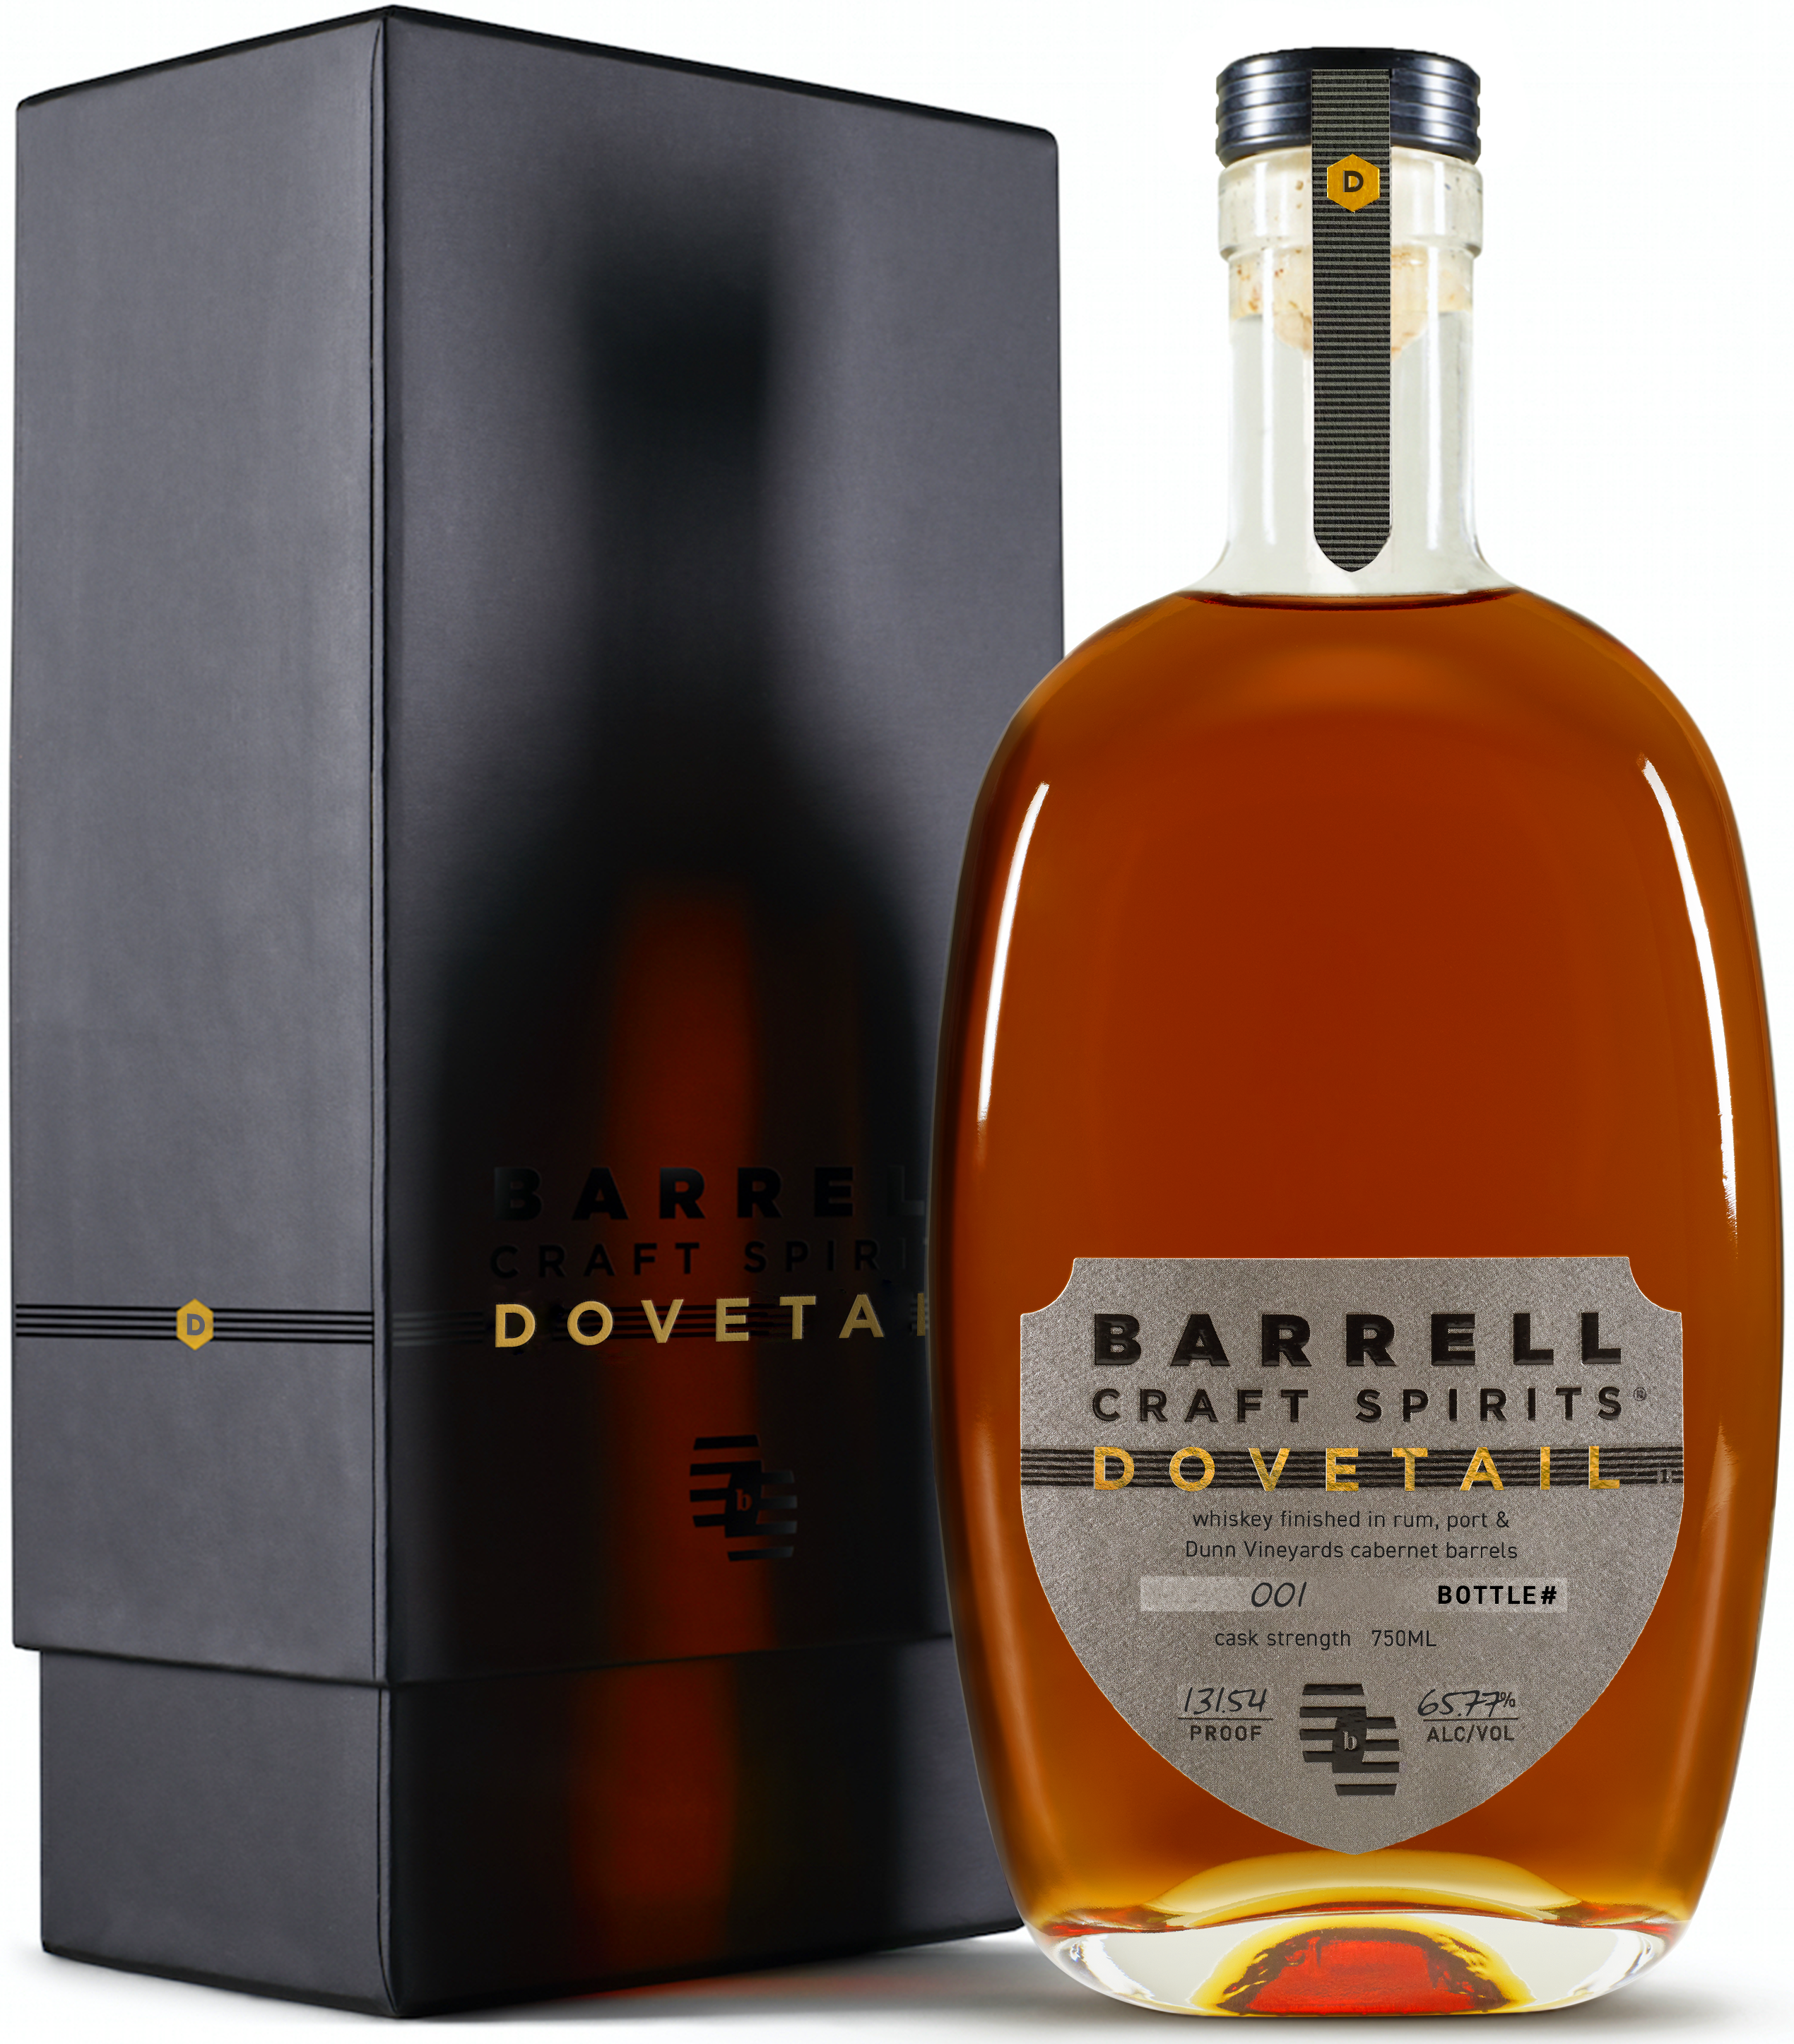 Barrell Gray Label Dovetail Whiskey 65.77% abv. 750ml